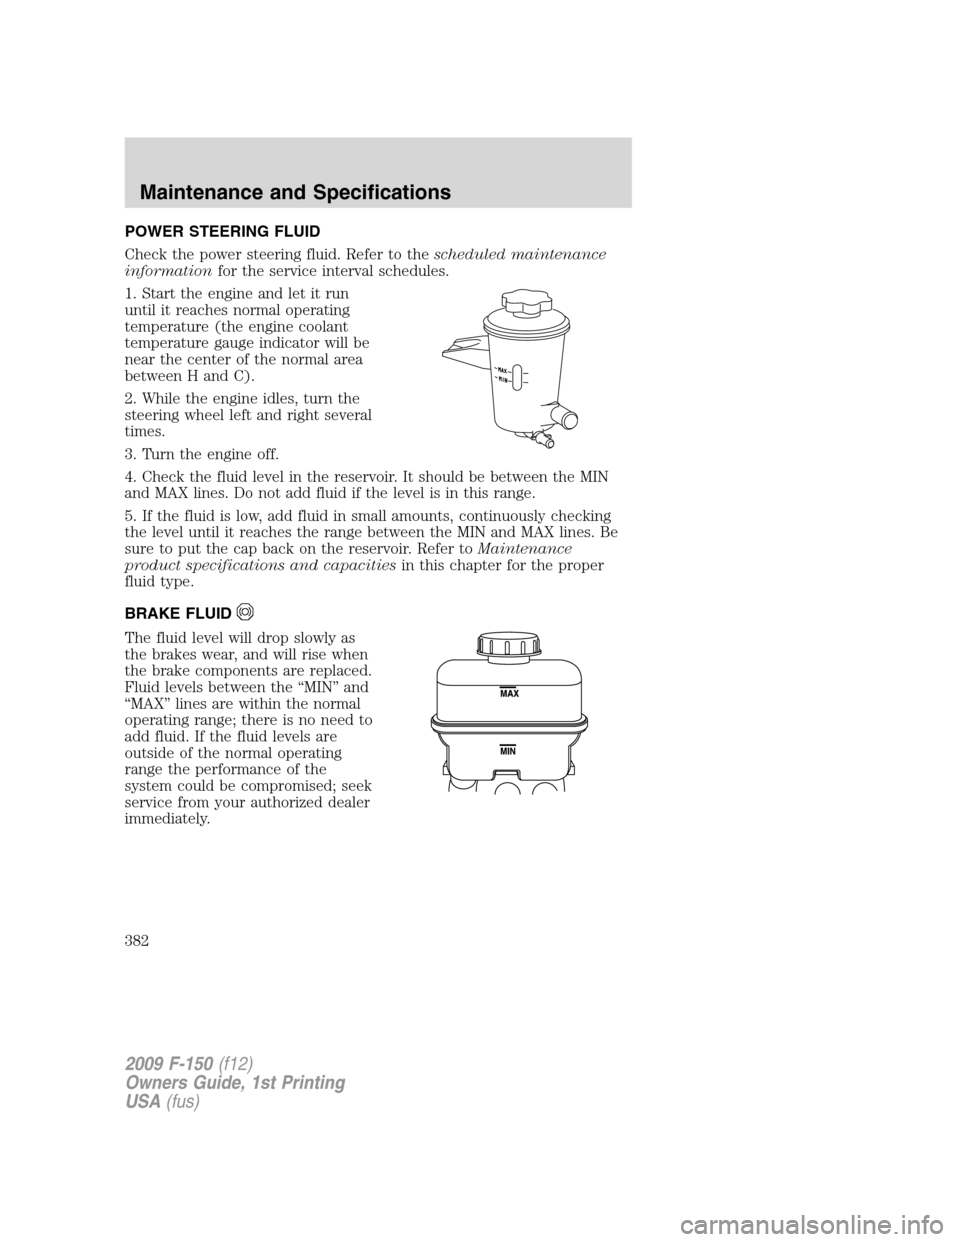 FORD F150 2009 12.G Owners Manual POWER STEERING FLUID
Check the power steering fluid. Refer to thescheduled maintenance
informationfor the service interval schedules.
1. Start the engine and let it run
until it reaches normal operati